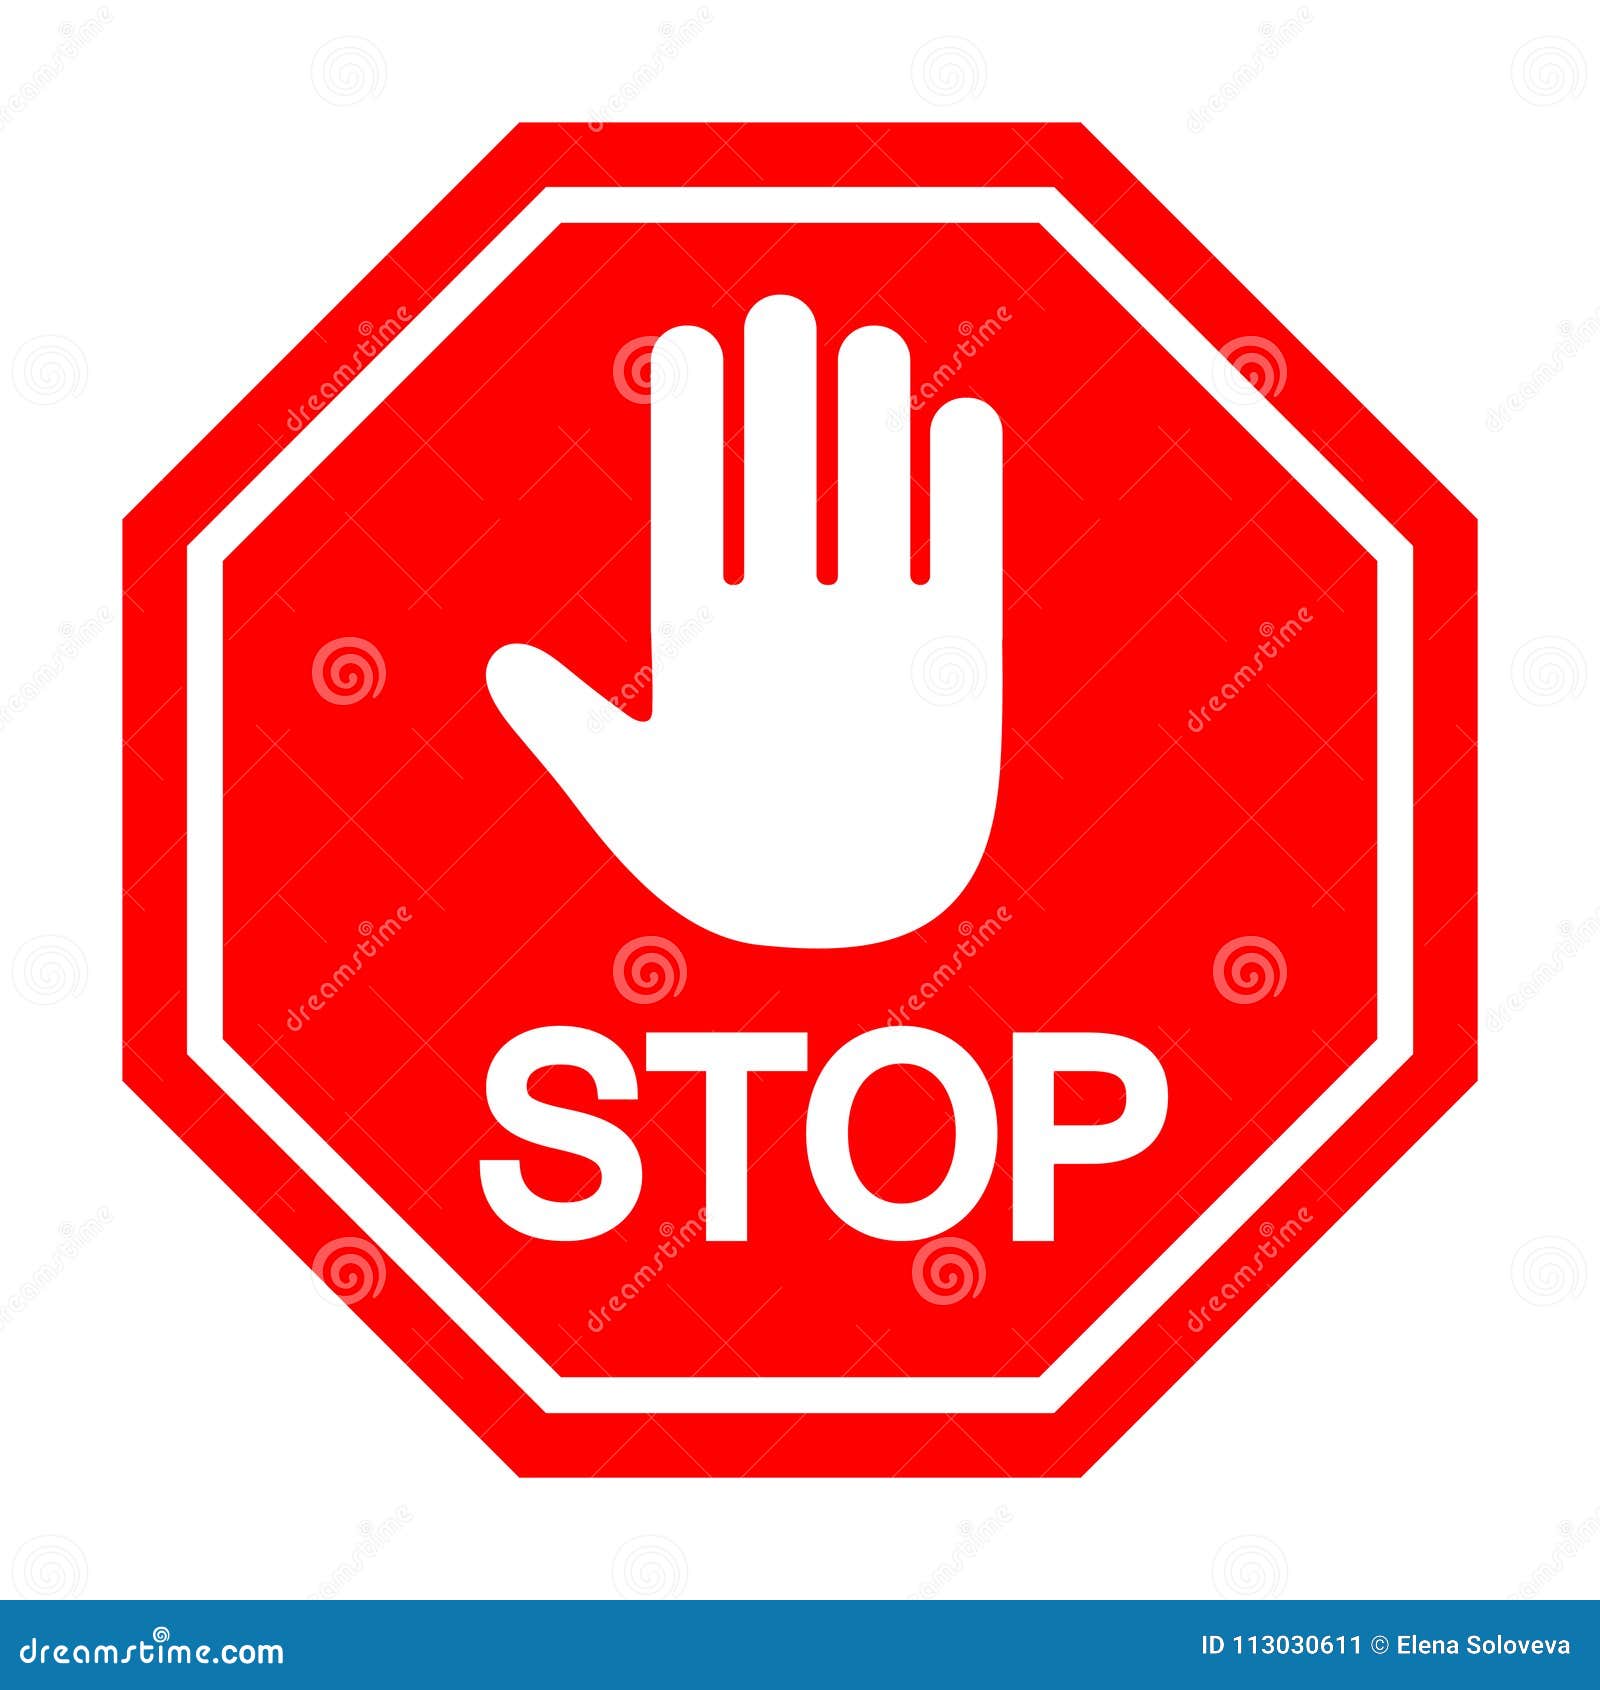 Is A Stop Sign A Symbol